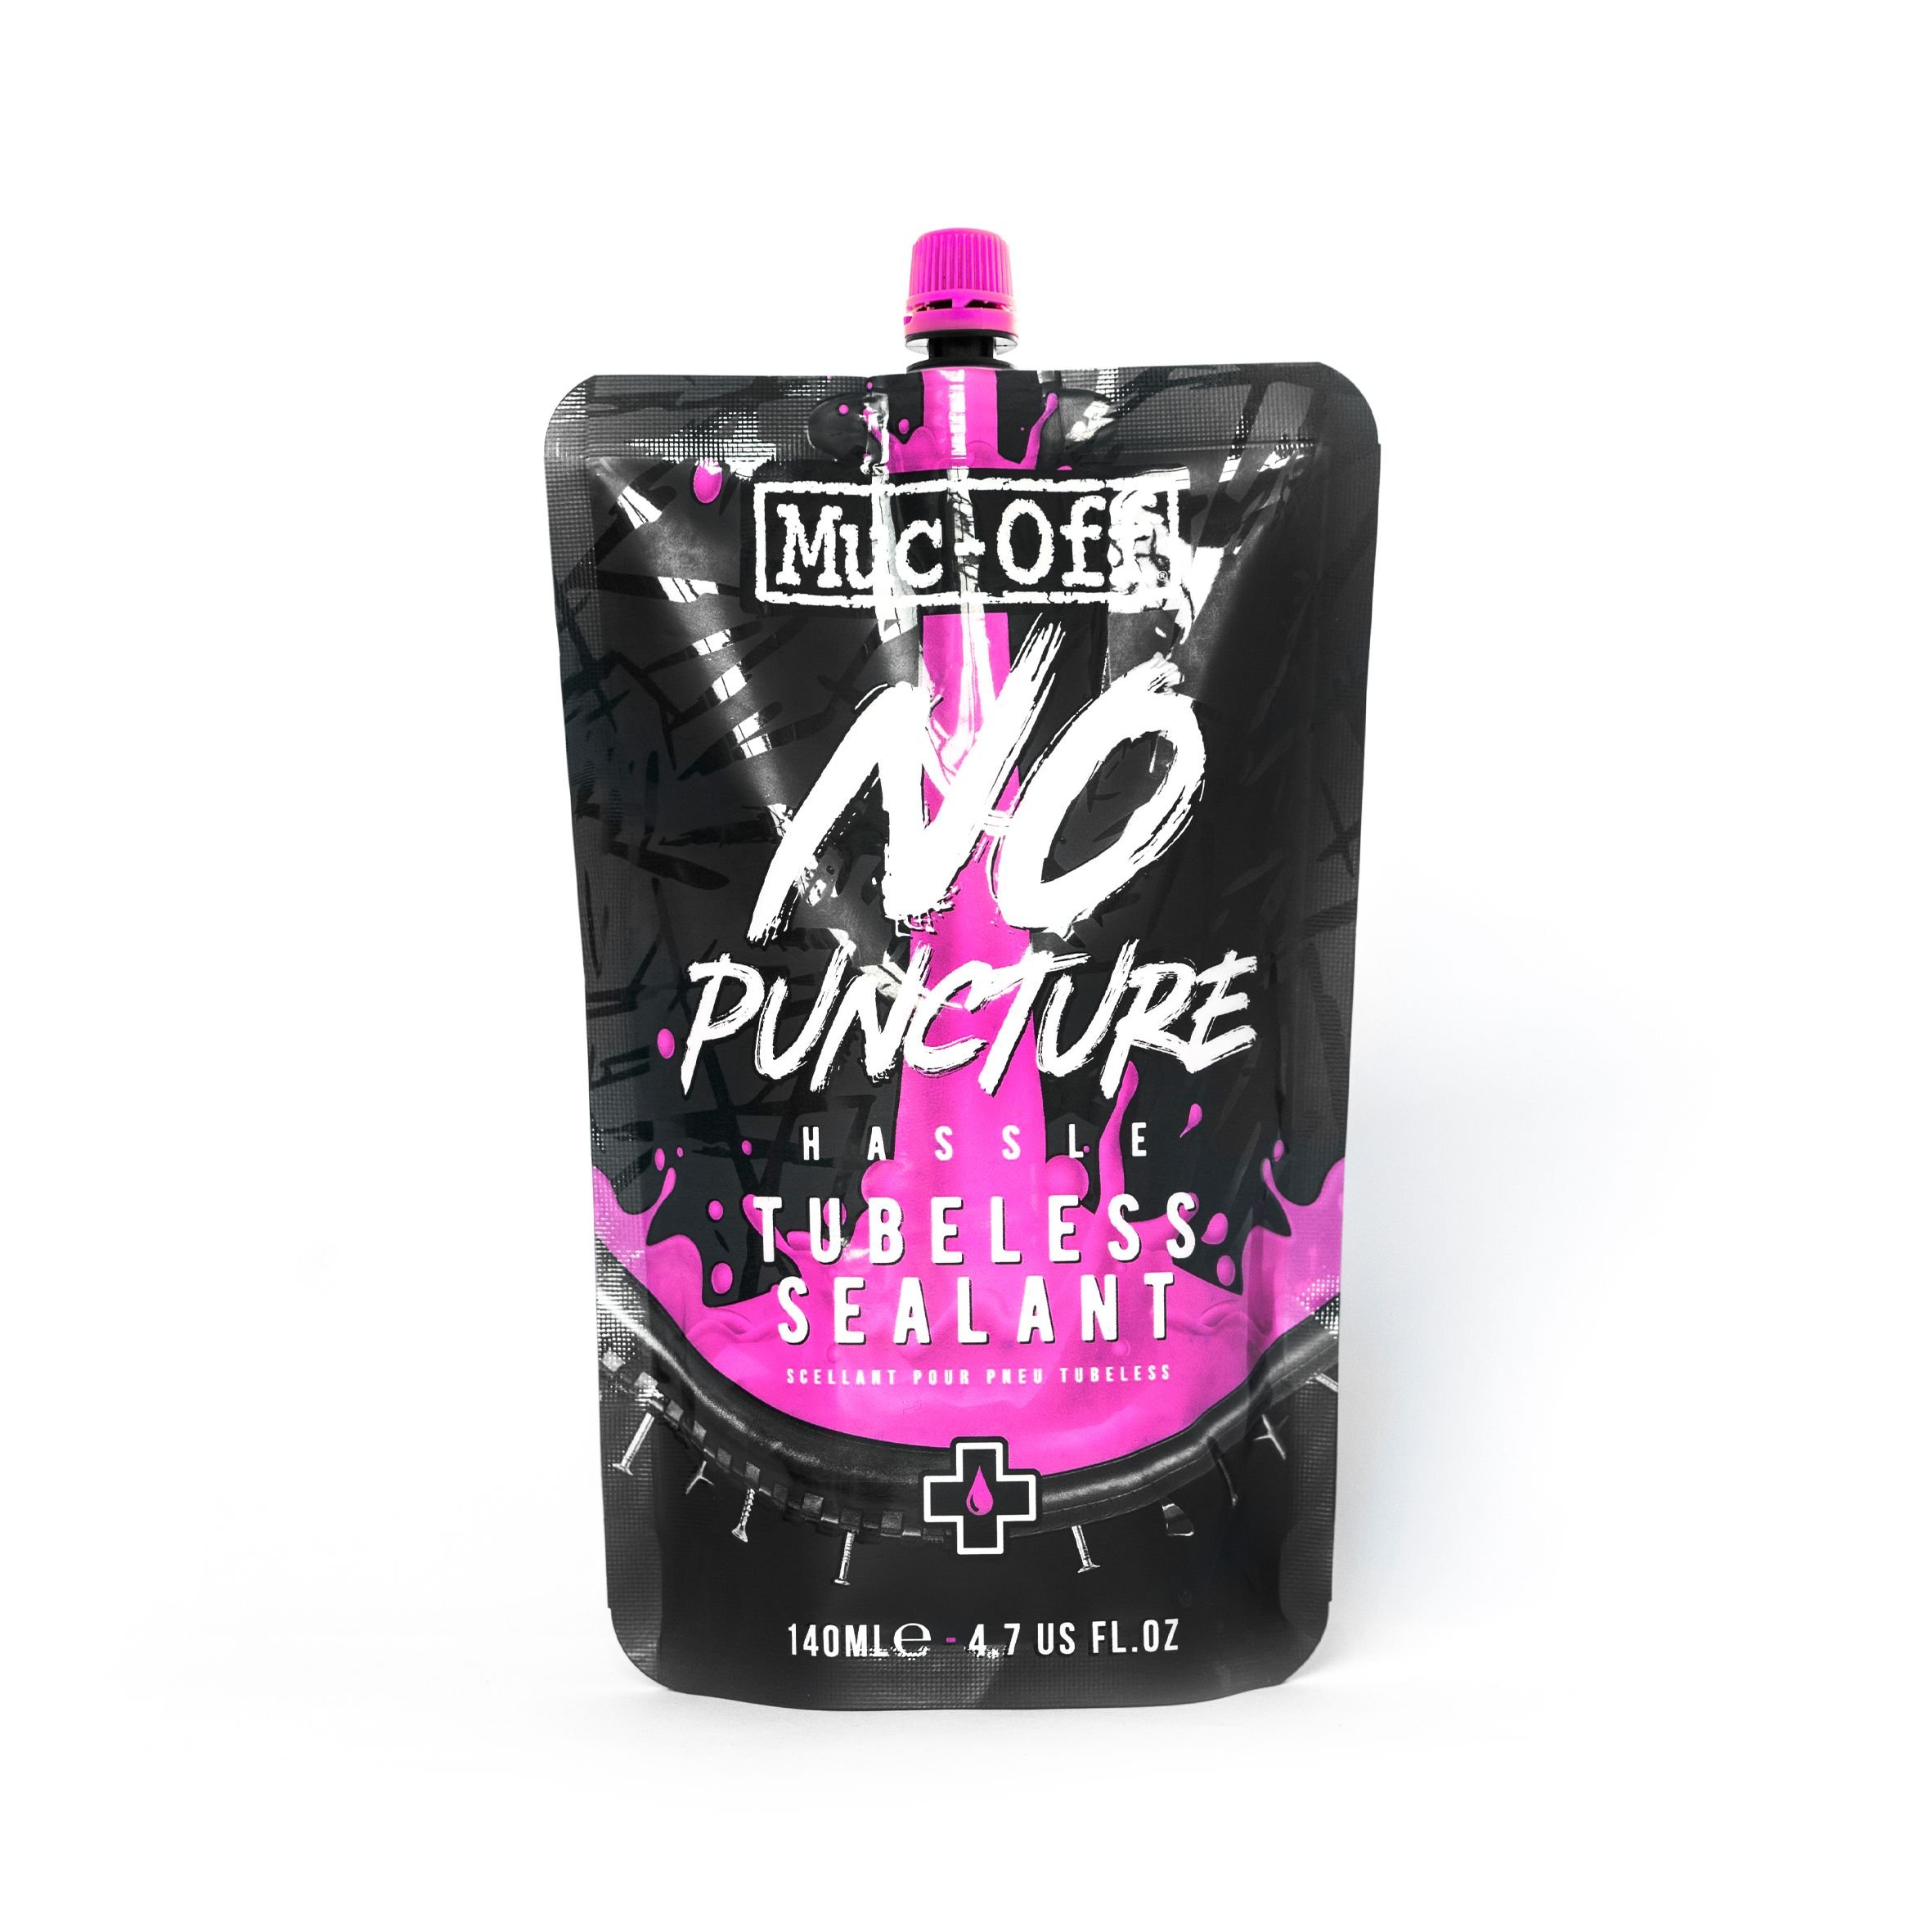 No Puncture Hassle 140ml